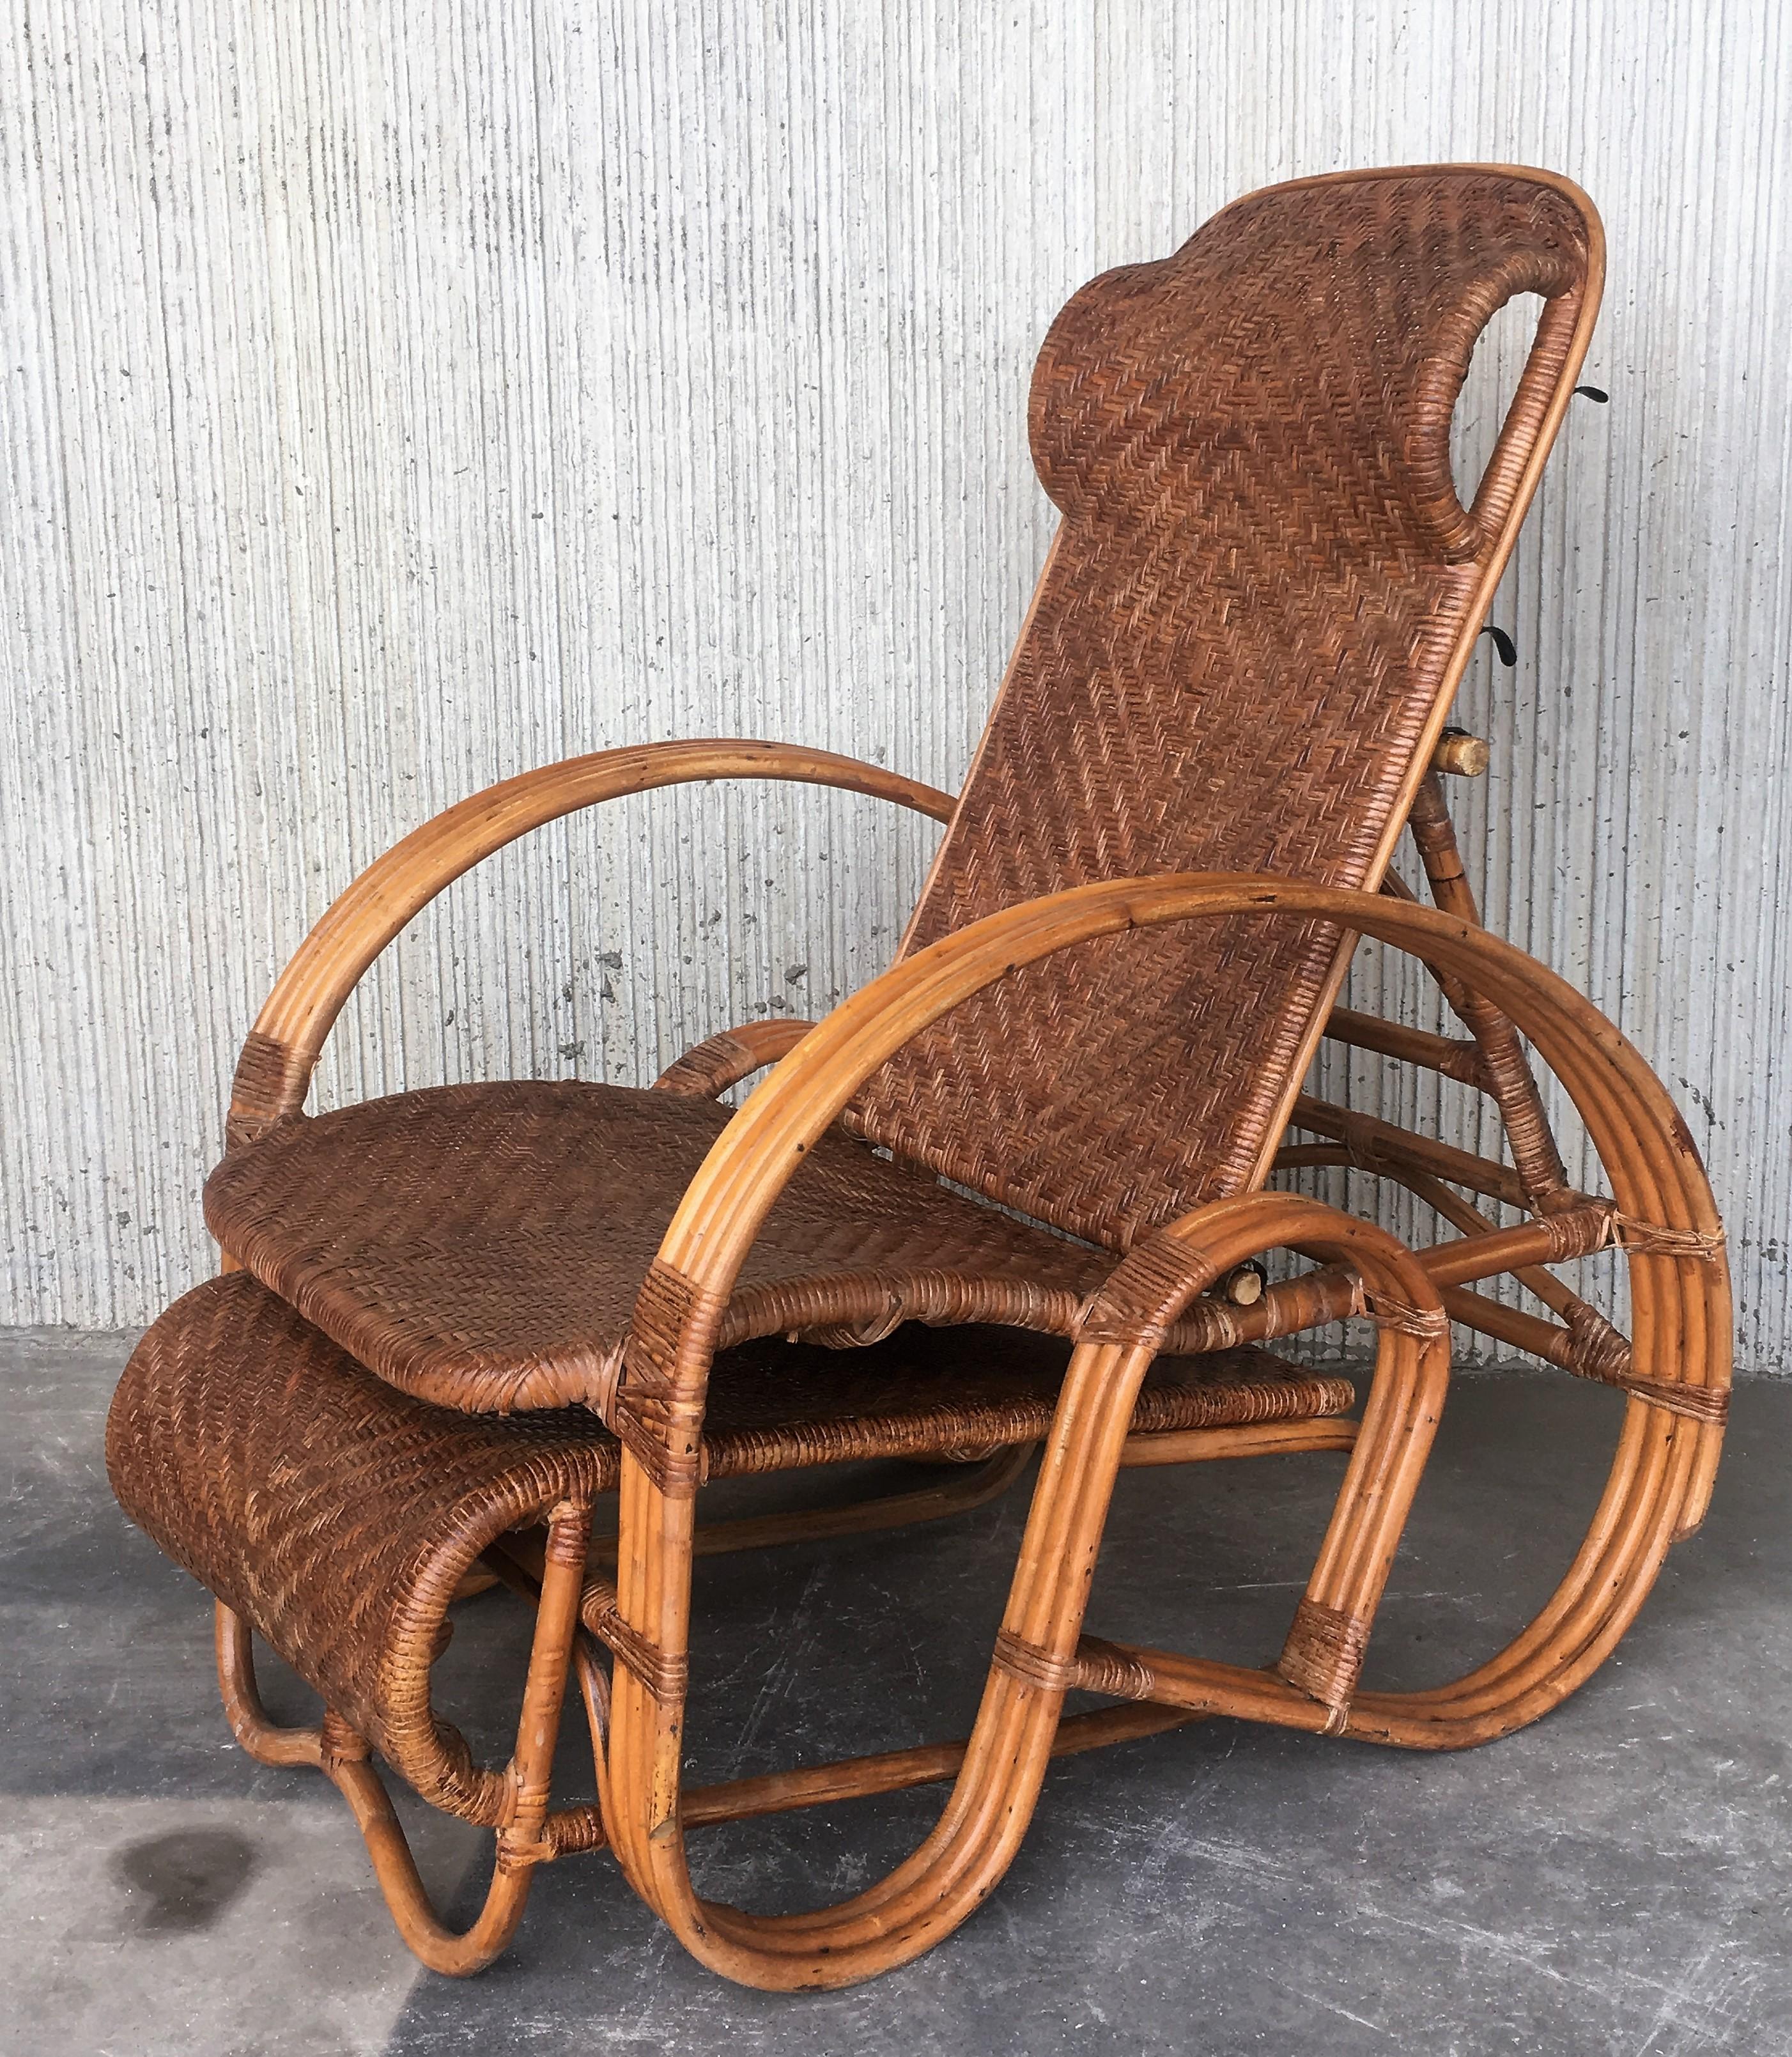 A height-adjustable chaise longue made of a bentwood frame with woven rattan.
The backrest can be placed in four different positions. 

The length of the chair in those positions is respectively 89in extended and 31.5 in like a